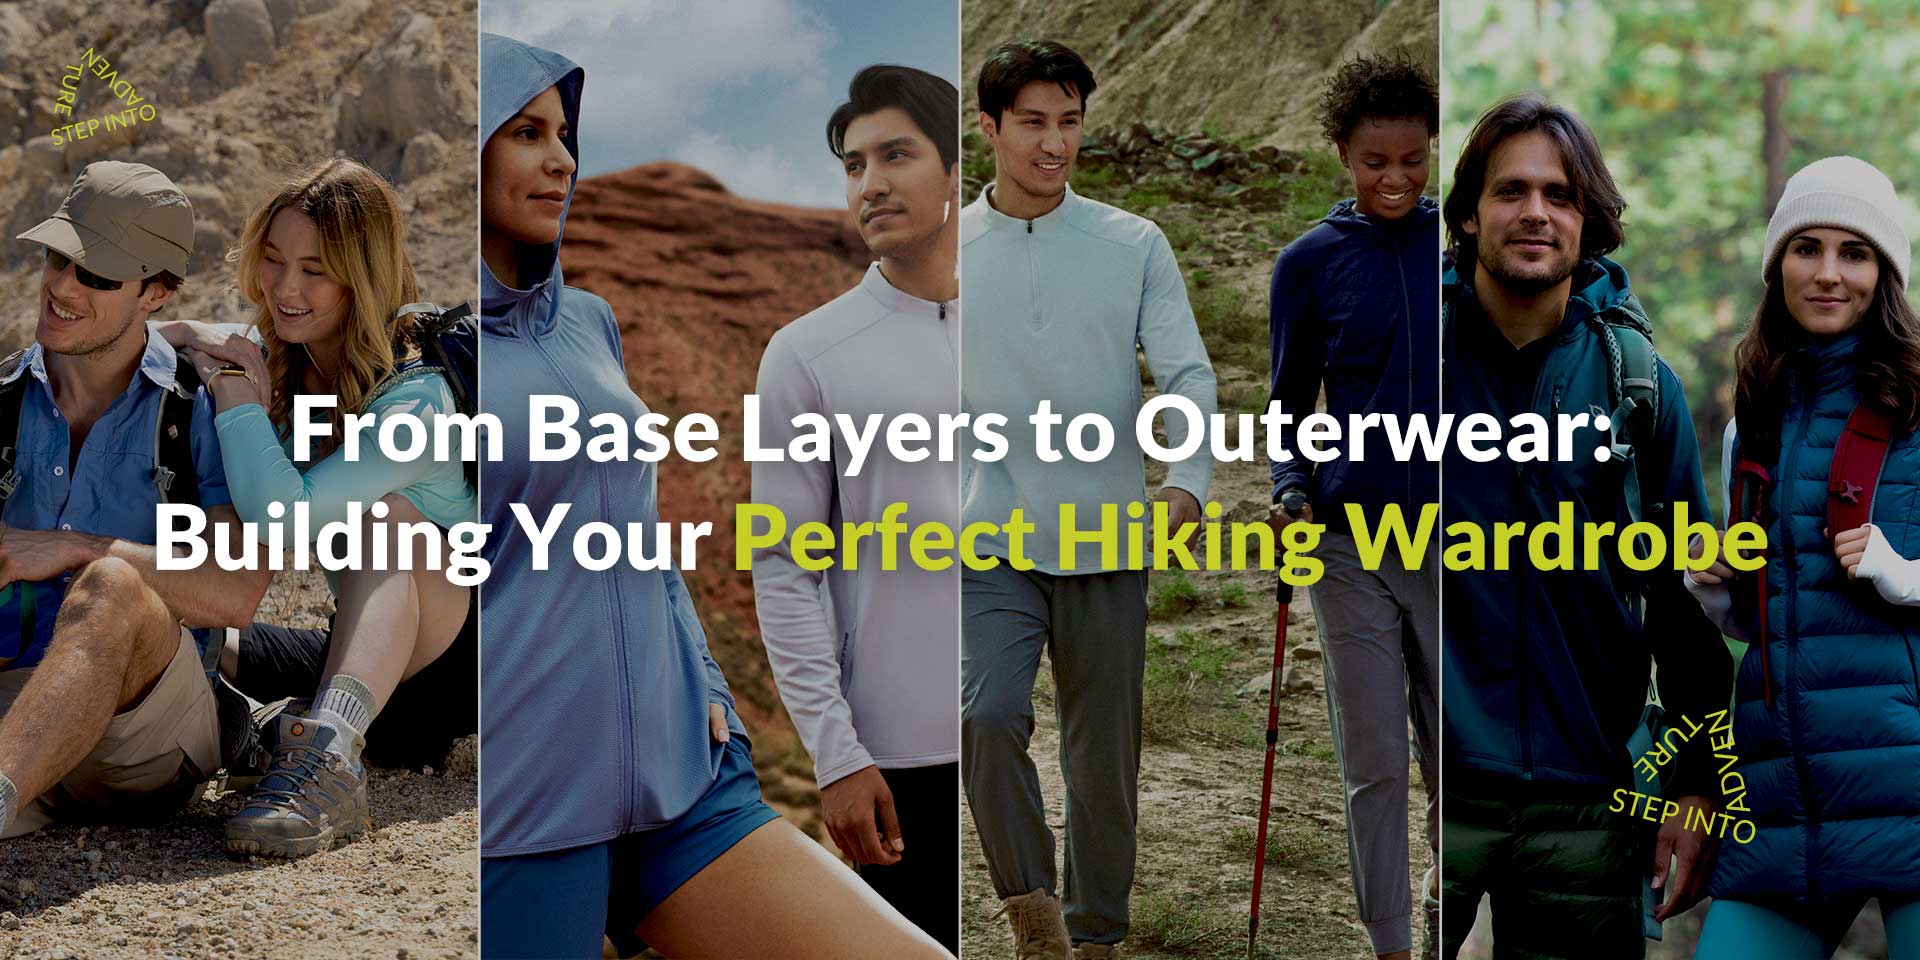 From Base Layers to Outer Wear: Building Your Perfect Hiking Wardrobe